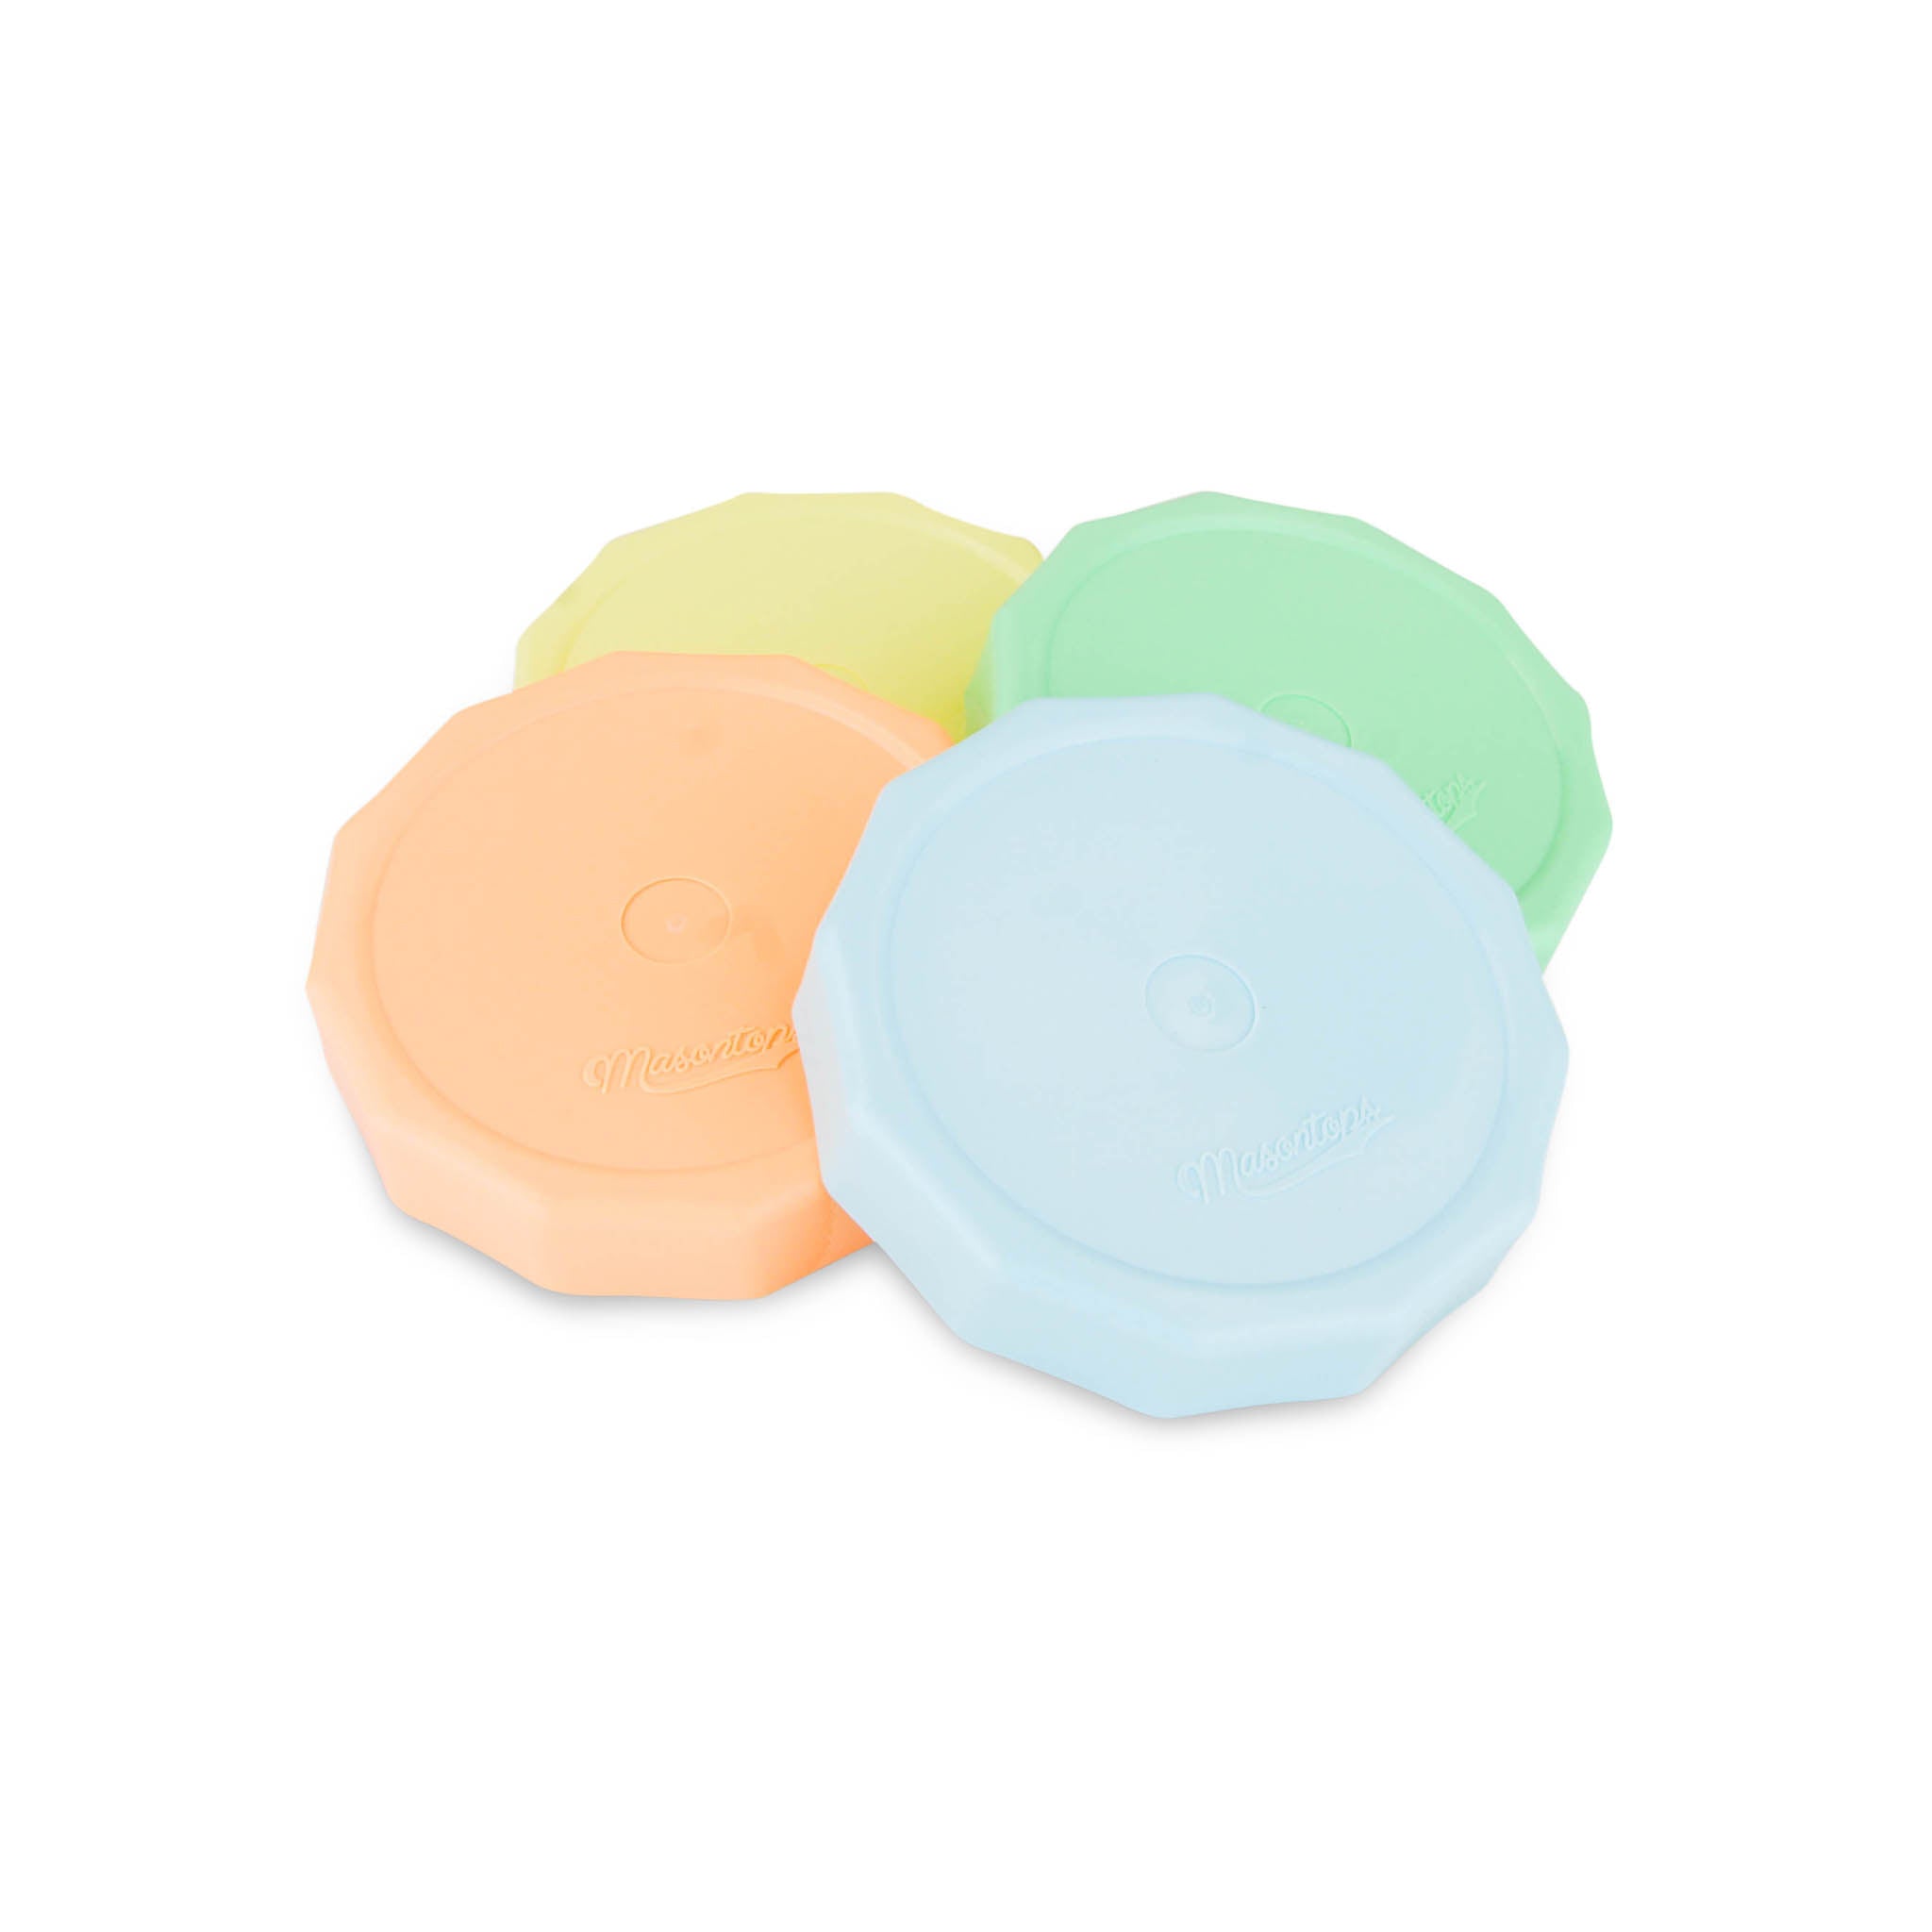 Masontop Wide Mouth Tough Tops, Assorted Pastel Set of 4